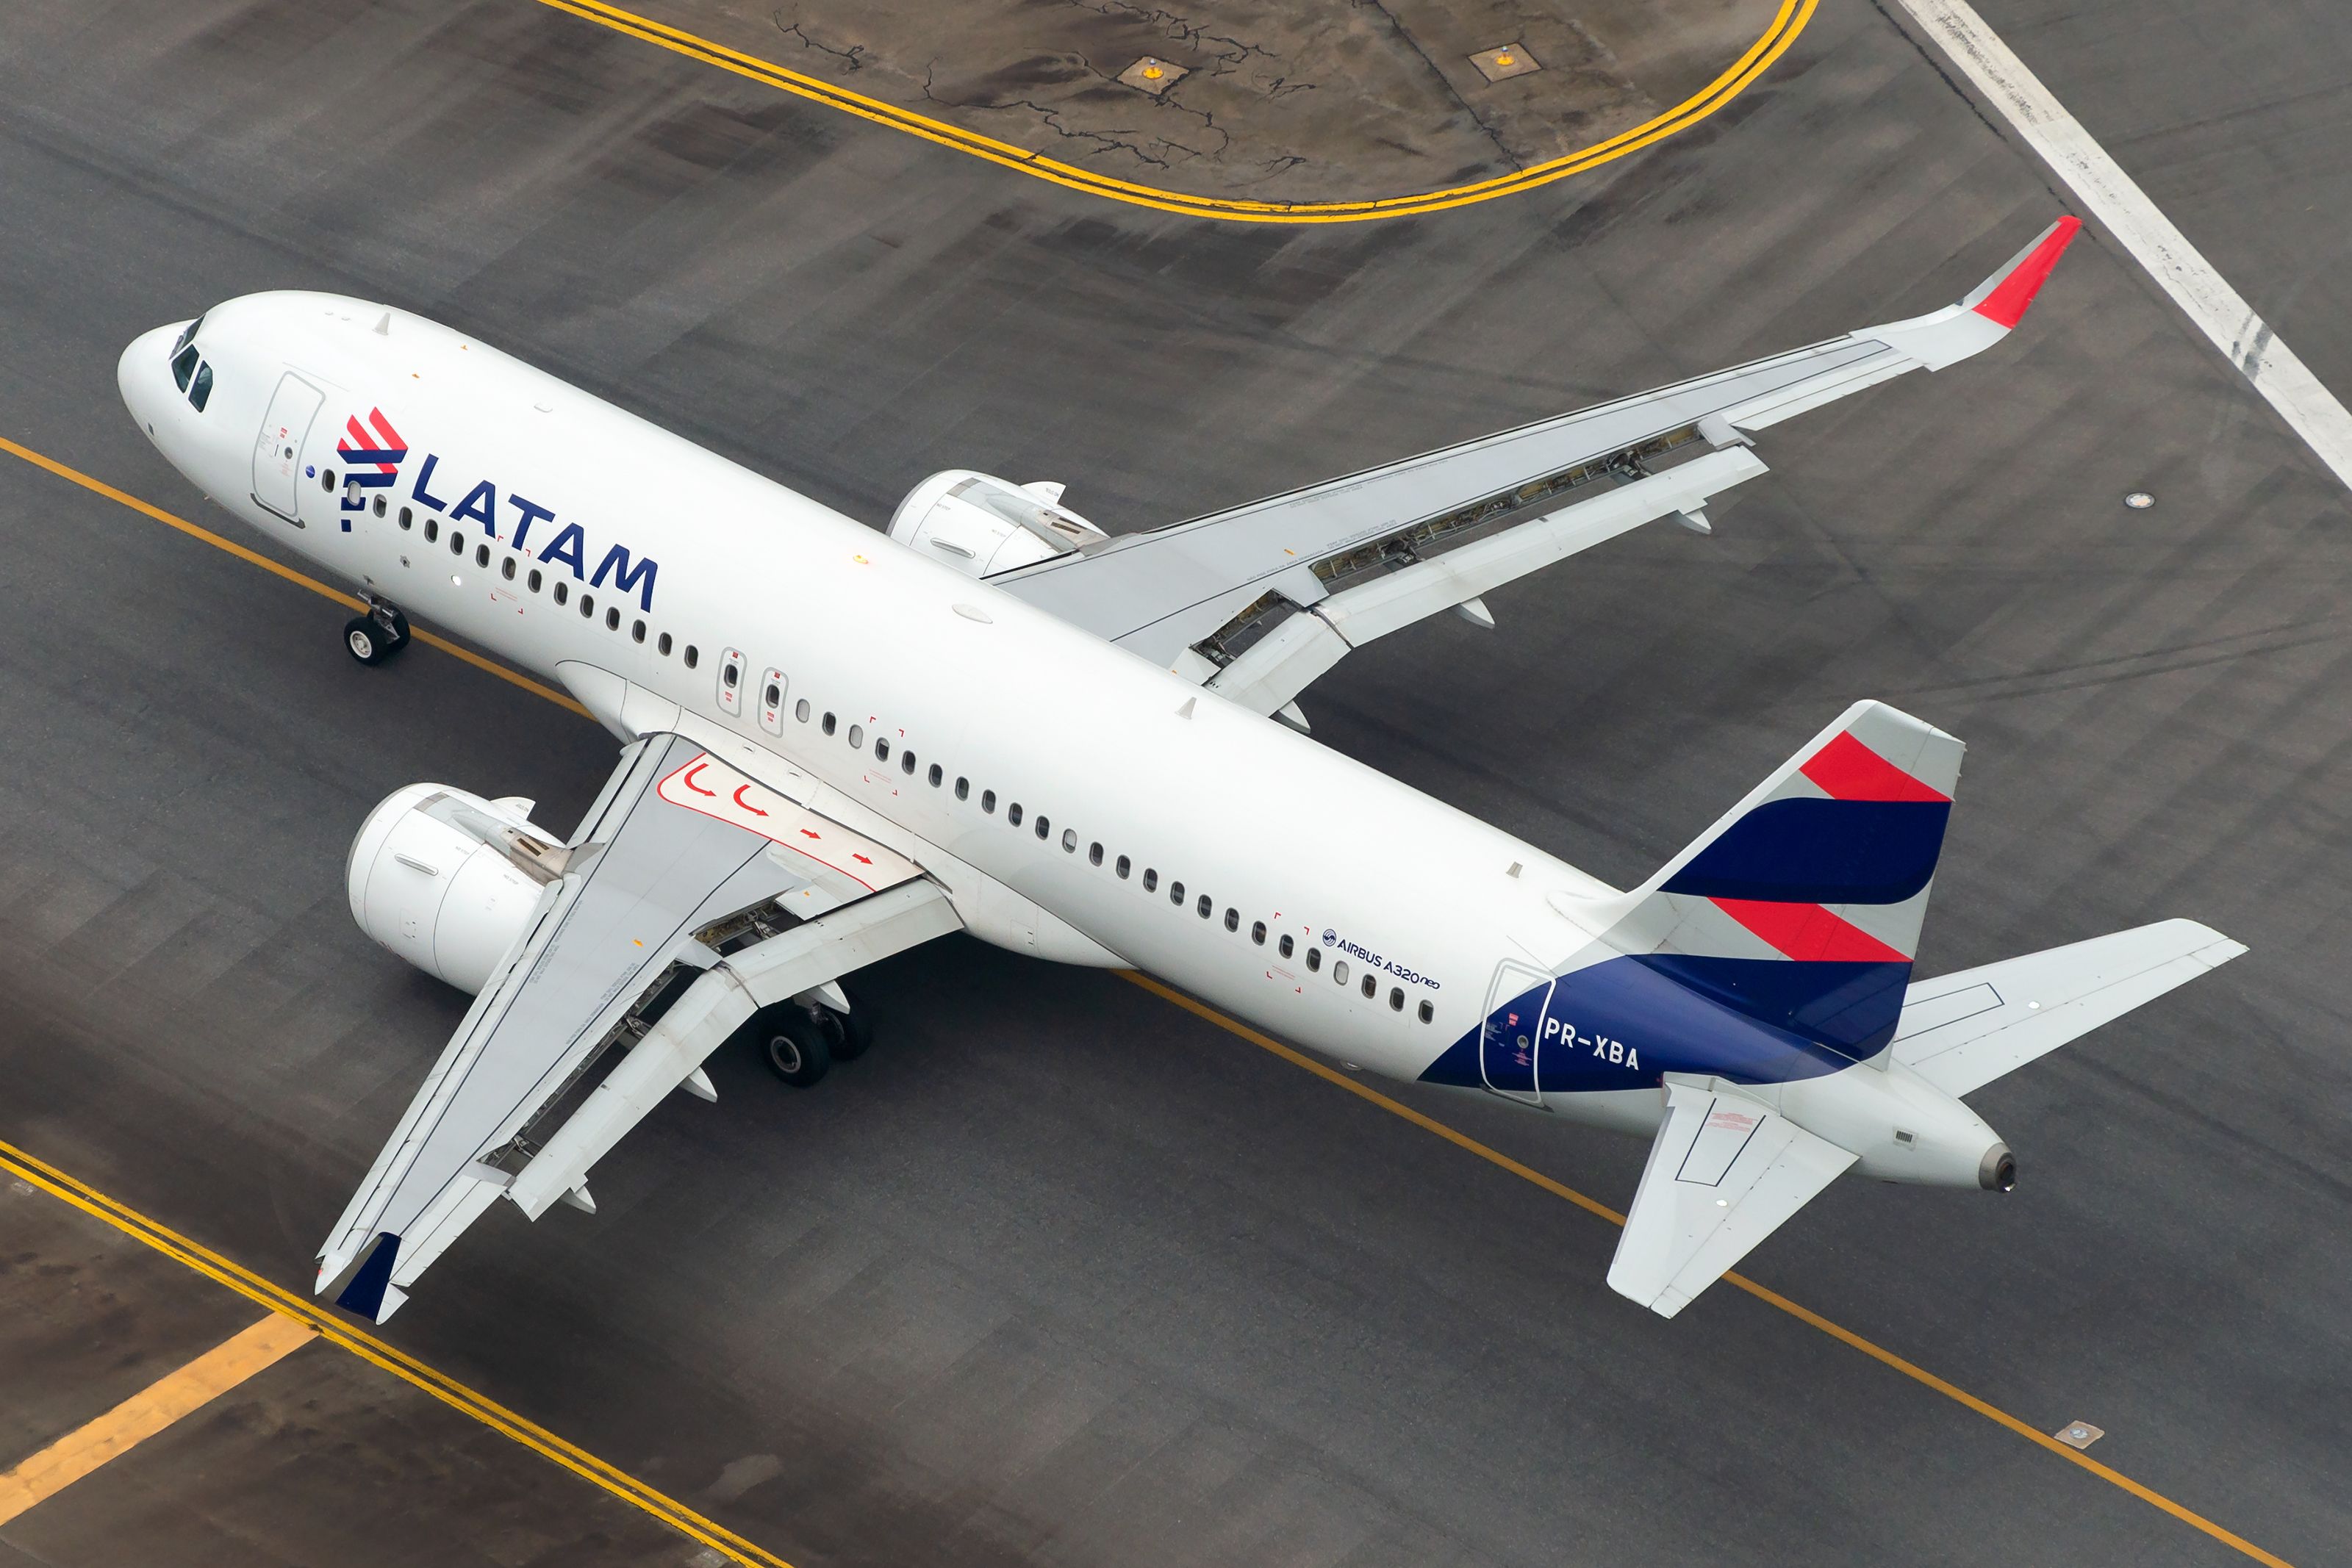 A LATAM Airbus A320neo taxiing to the runway.